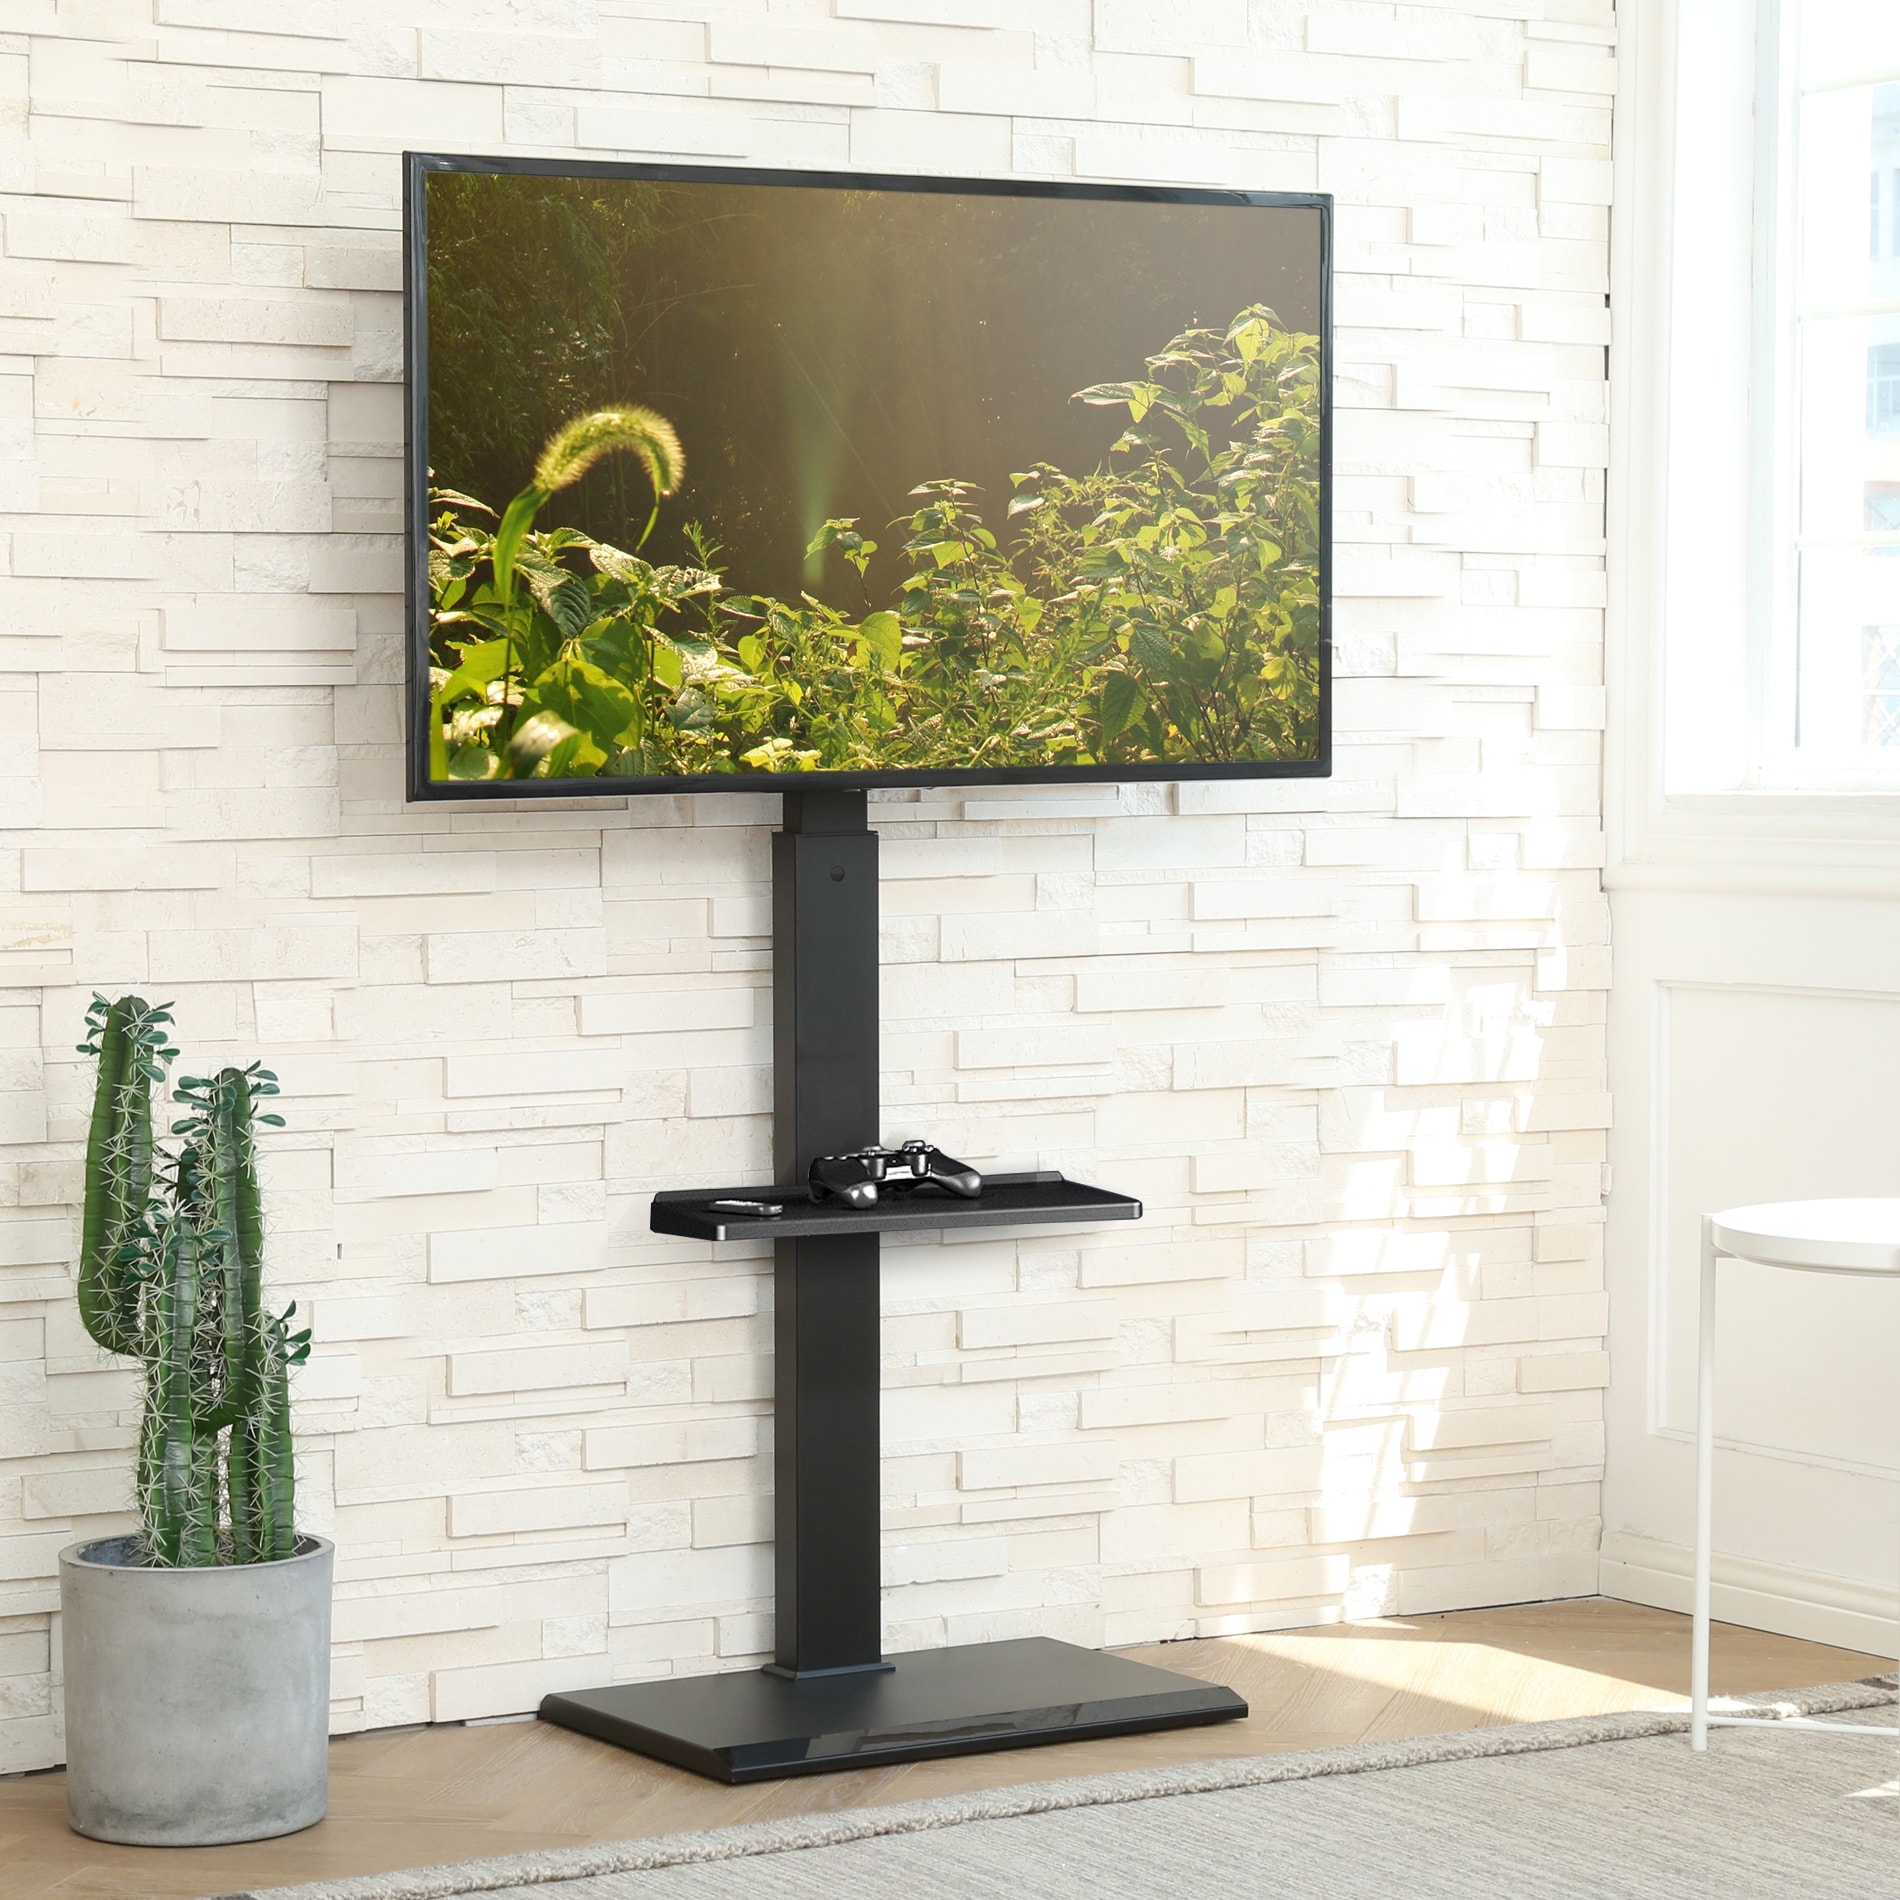 FITUEYES Floor TV Stand Height Adjustable Swivel Mount Up to 65 inches  Bed Bath  Beyond 32454143